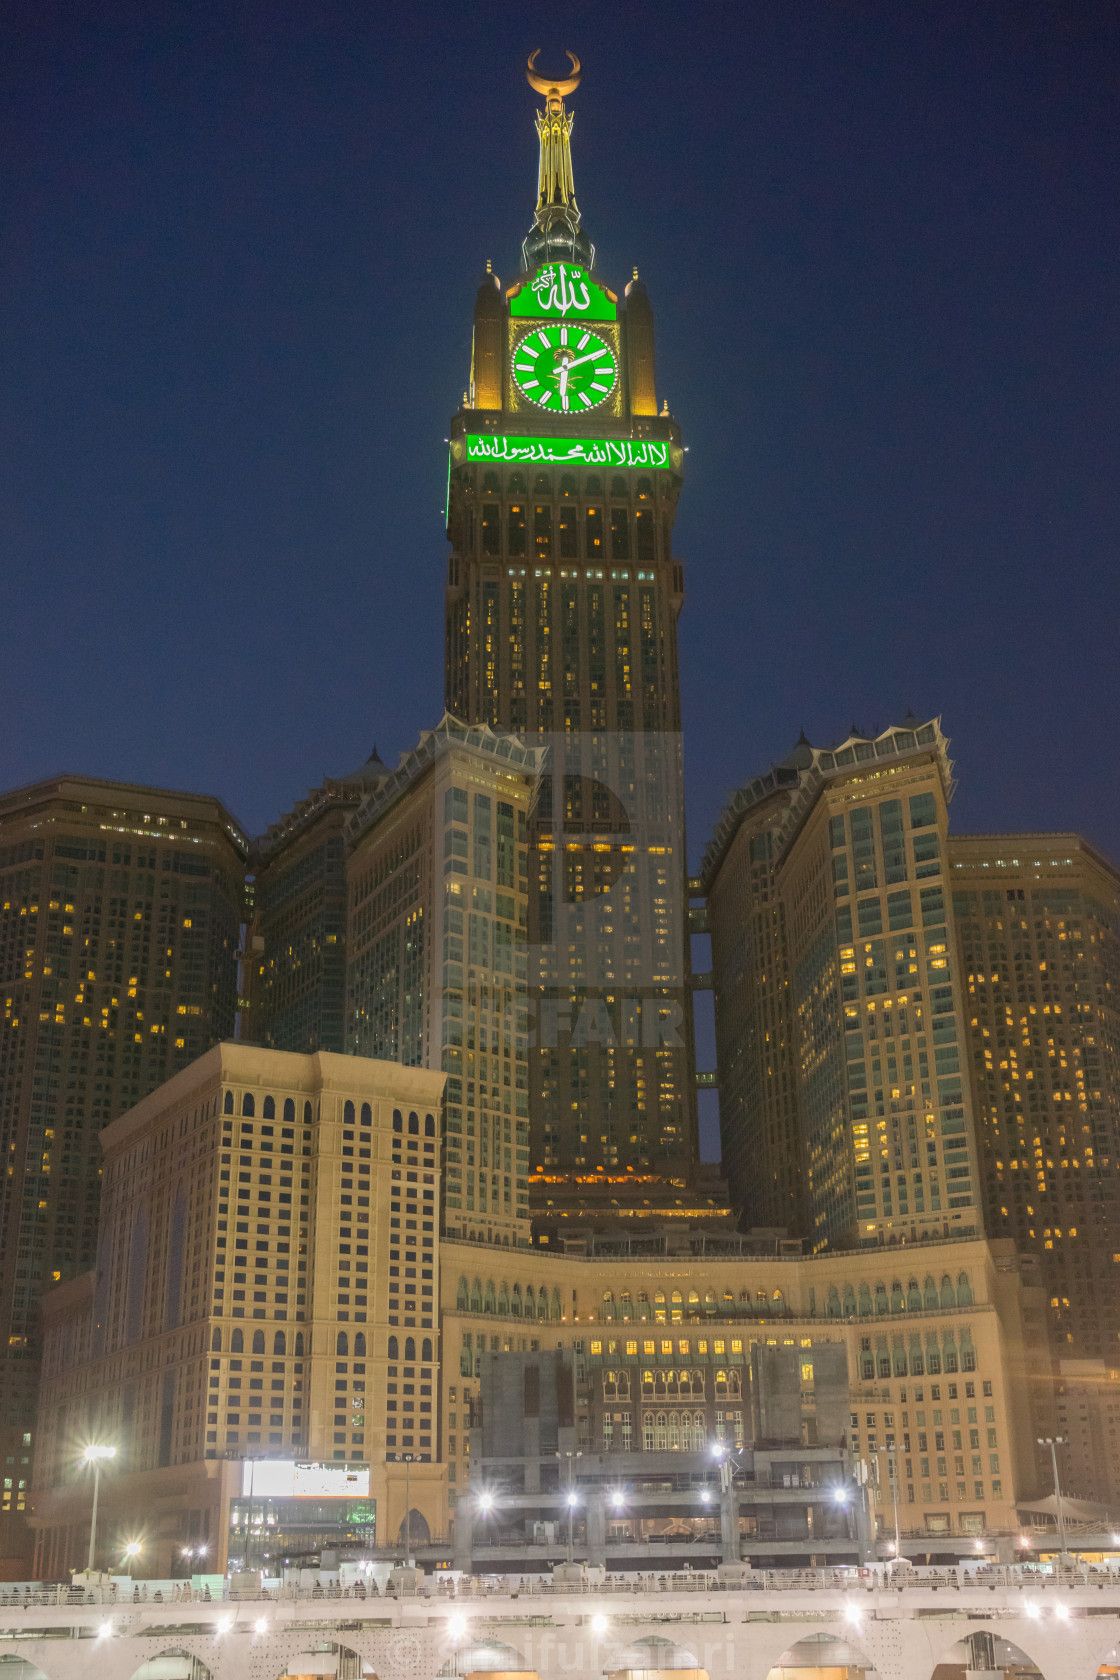 Morning view of minaret Mecca Royal Clock Tower Hotel, download or print for £1.24